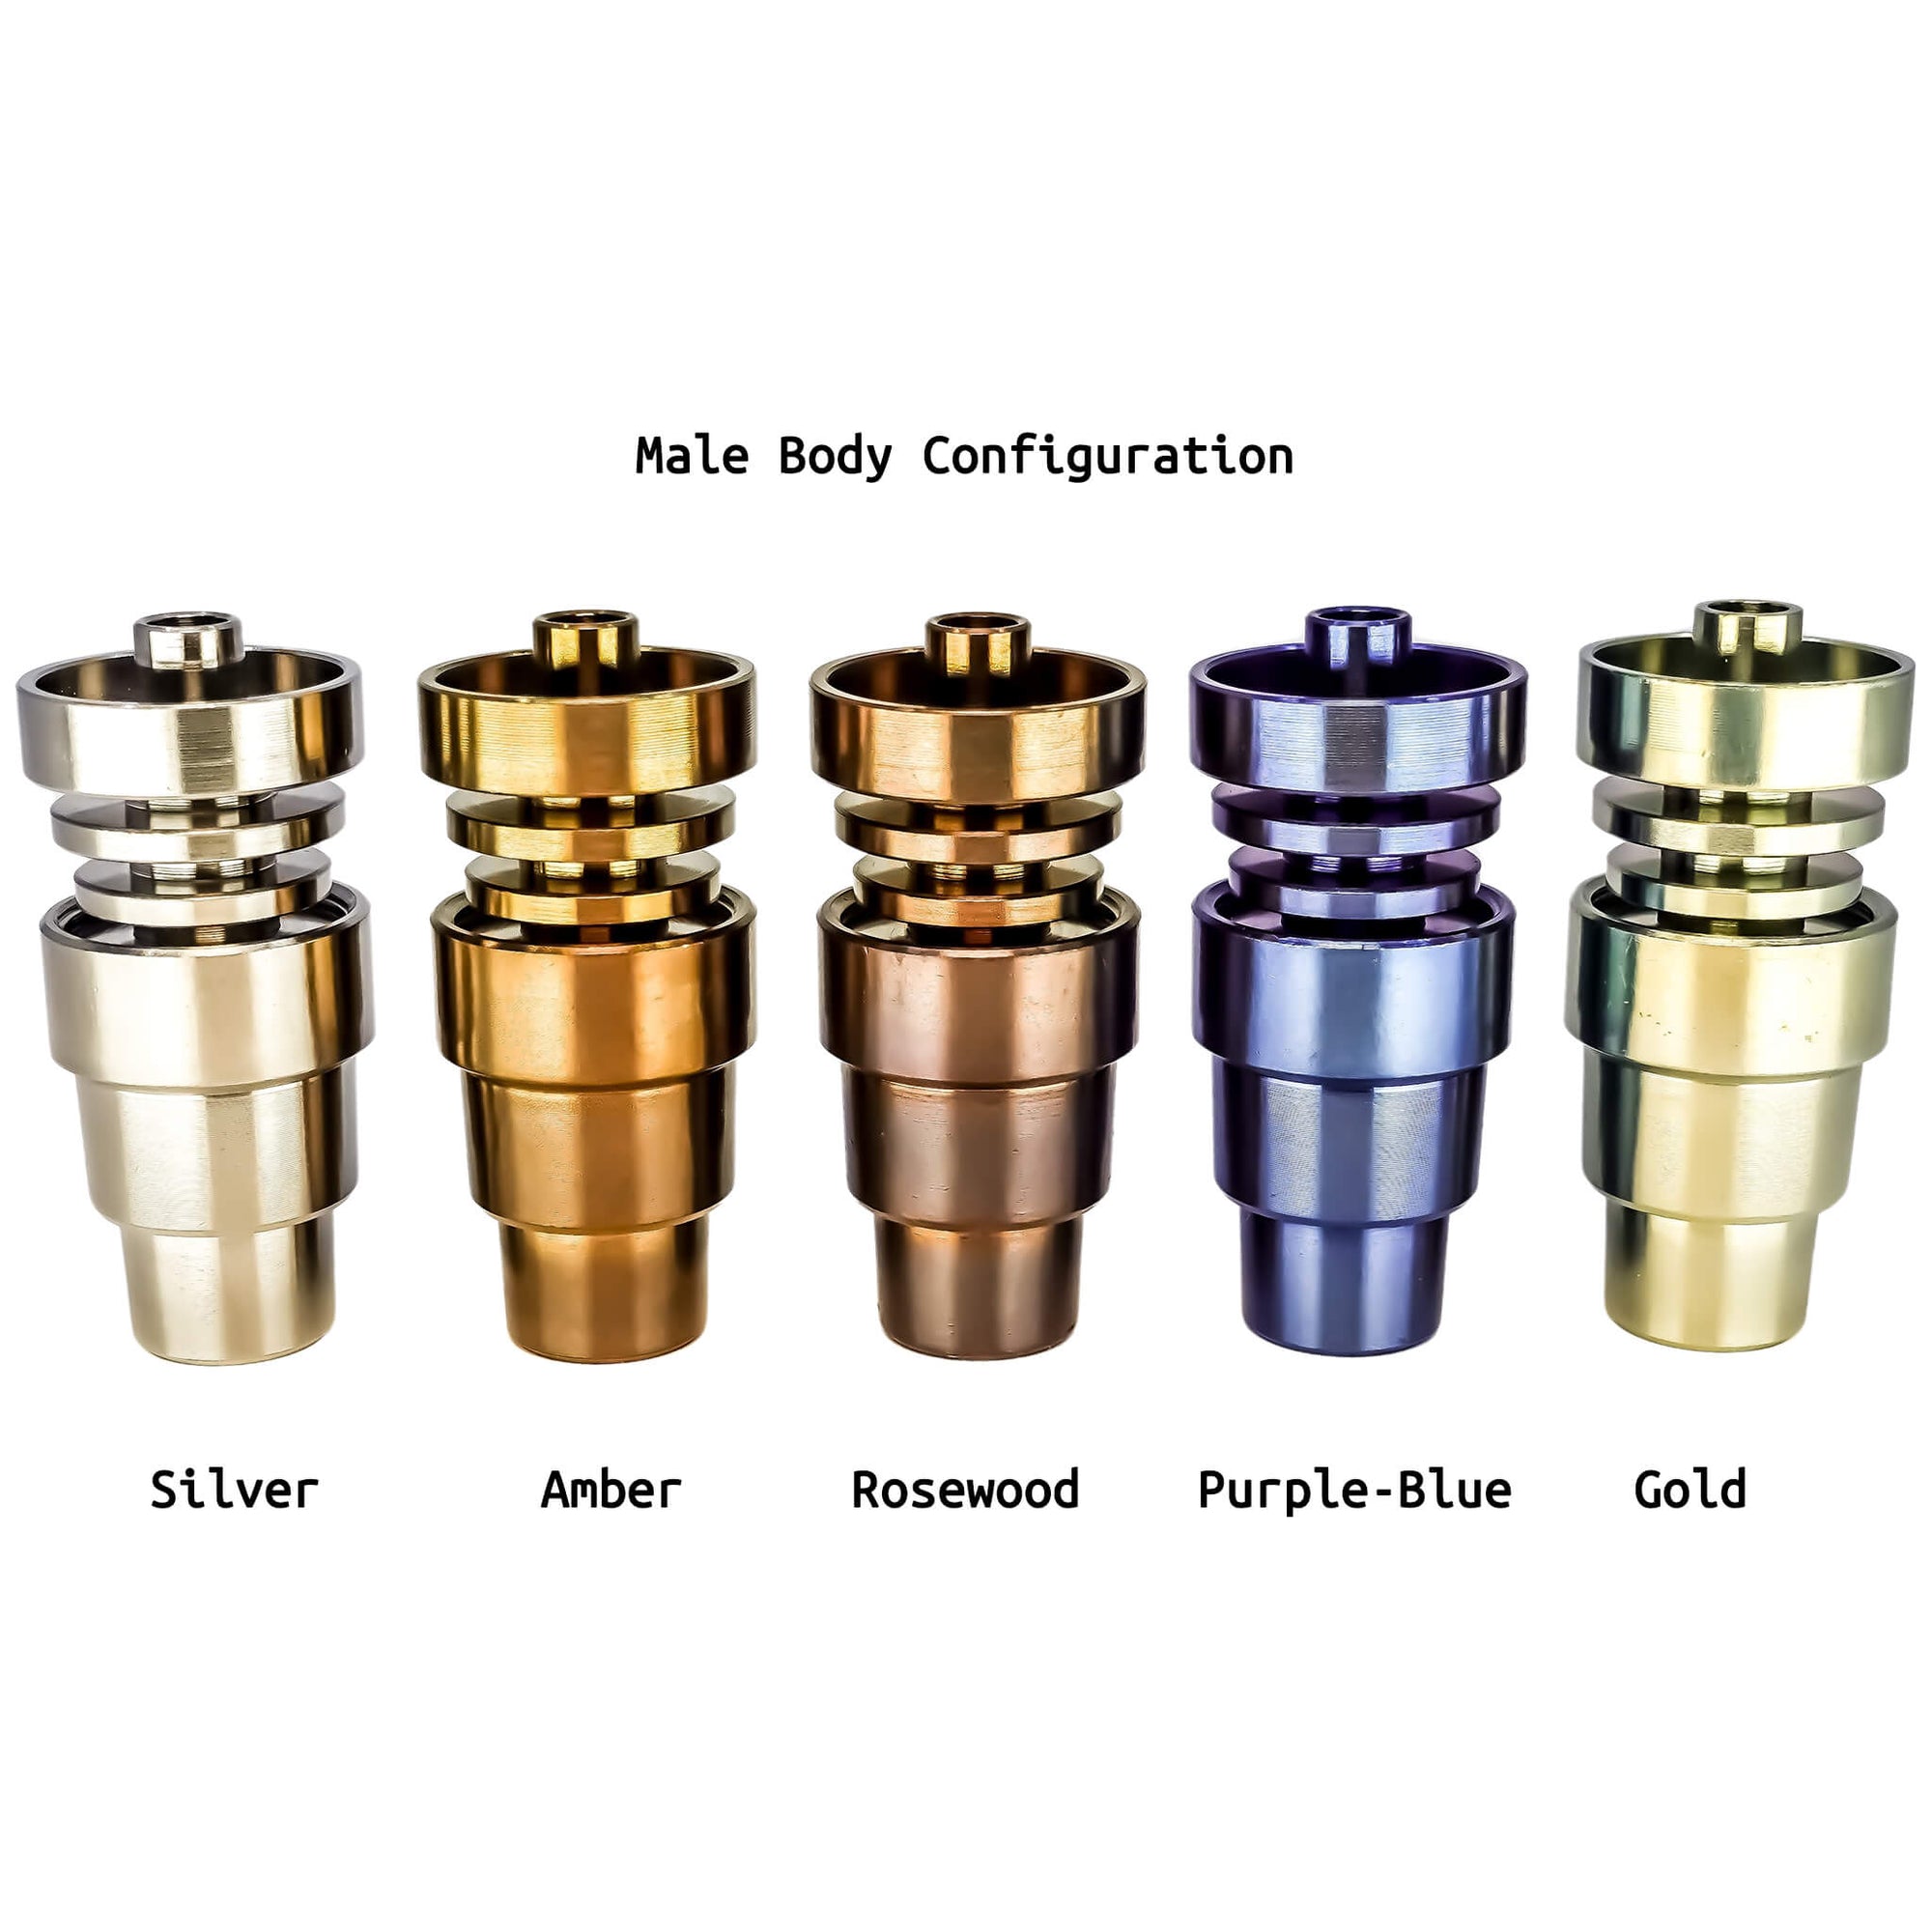 4-N-1 Titanium Nail Kit | All Five Color Variation View Male Bodied | the dabbing specialists